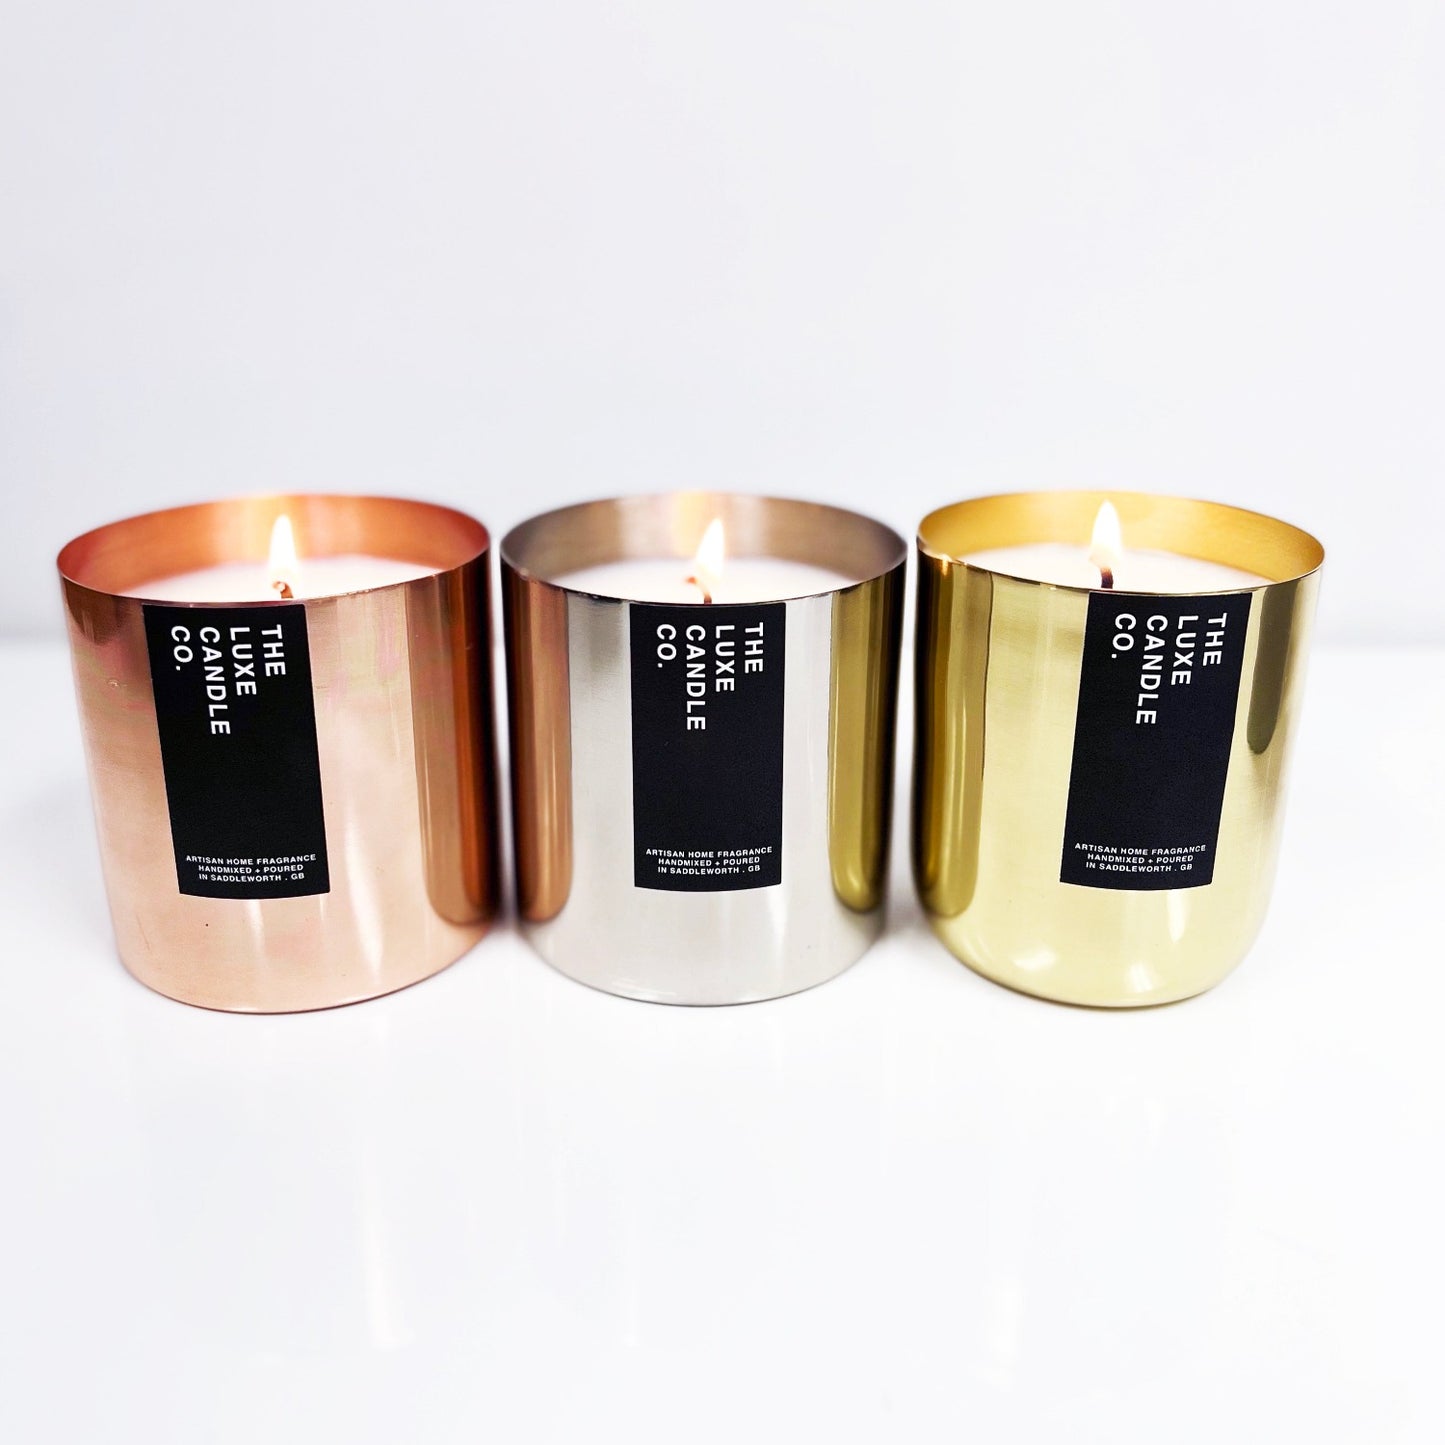 rose gold scented candle set. Rose gold gift